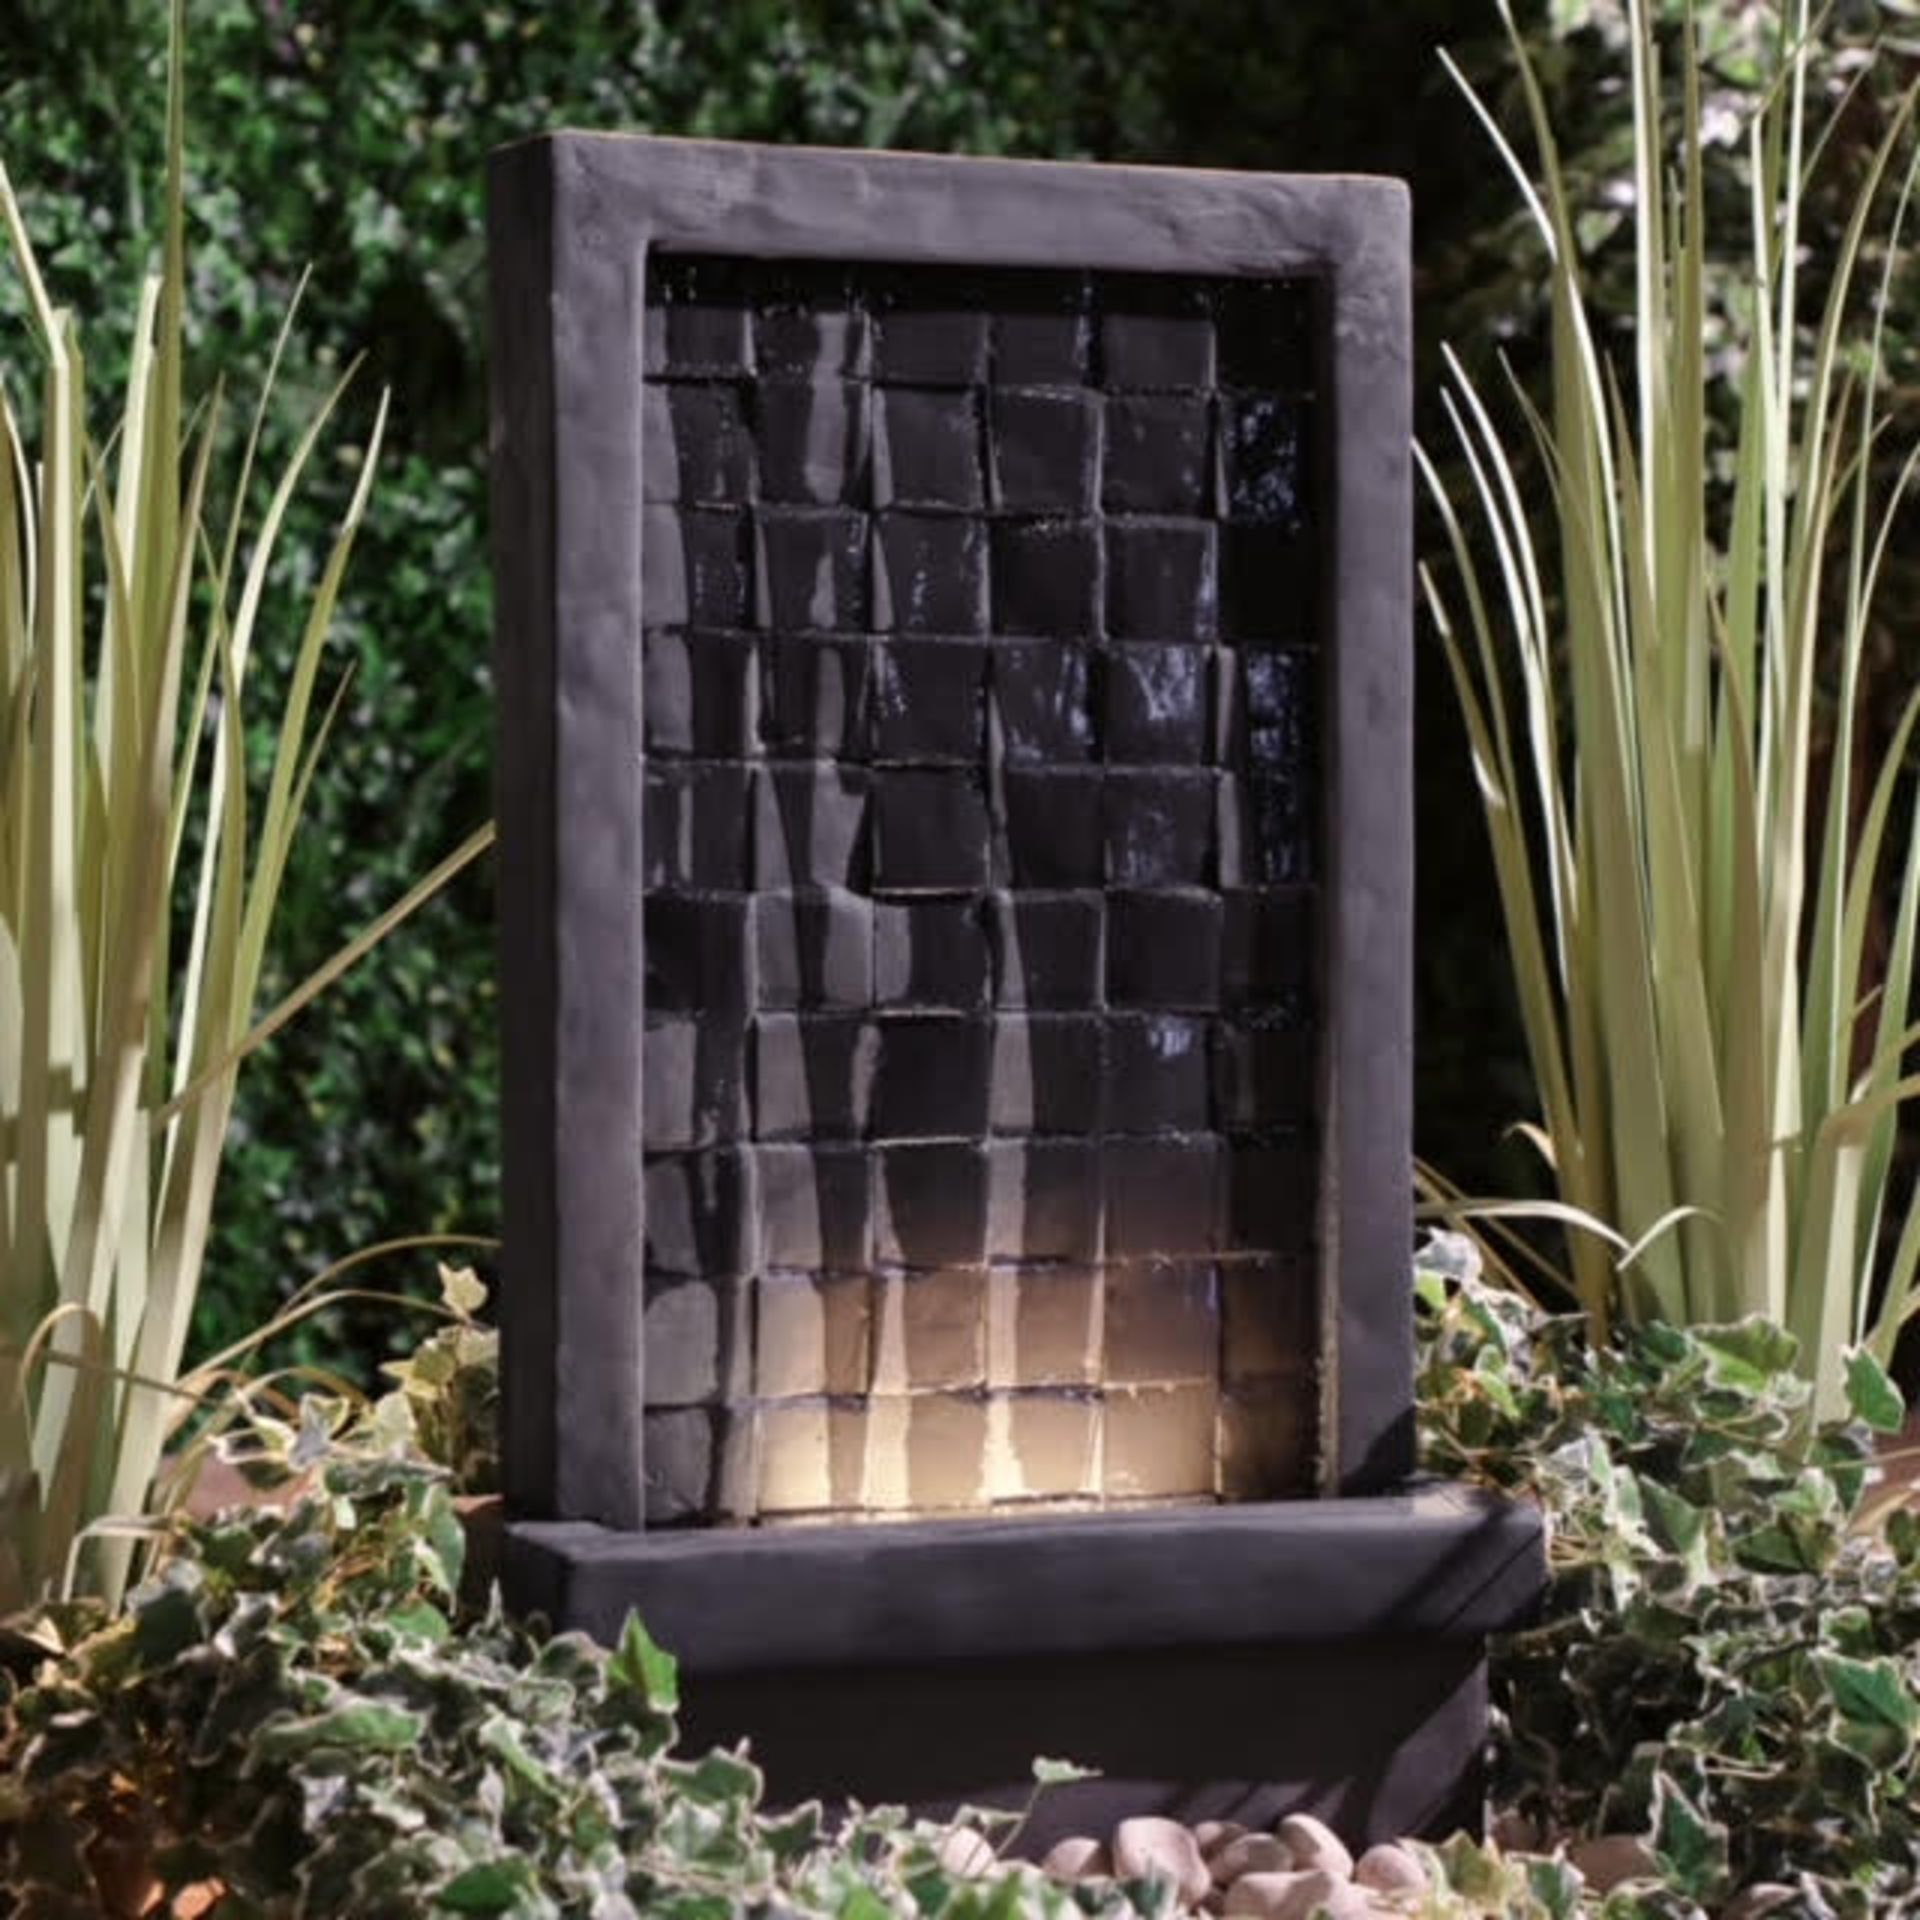 New & Boxed Tiled Waterfall Water Feature - Tall LED Wall Lit Cascading Water Fountain. RRP £349.99. - Image 3 of 6